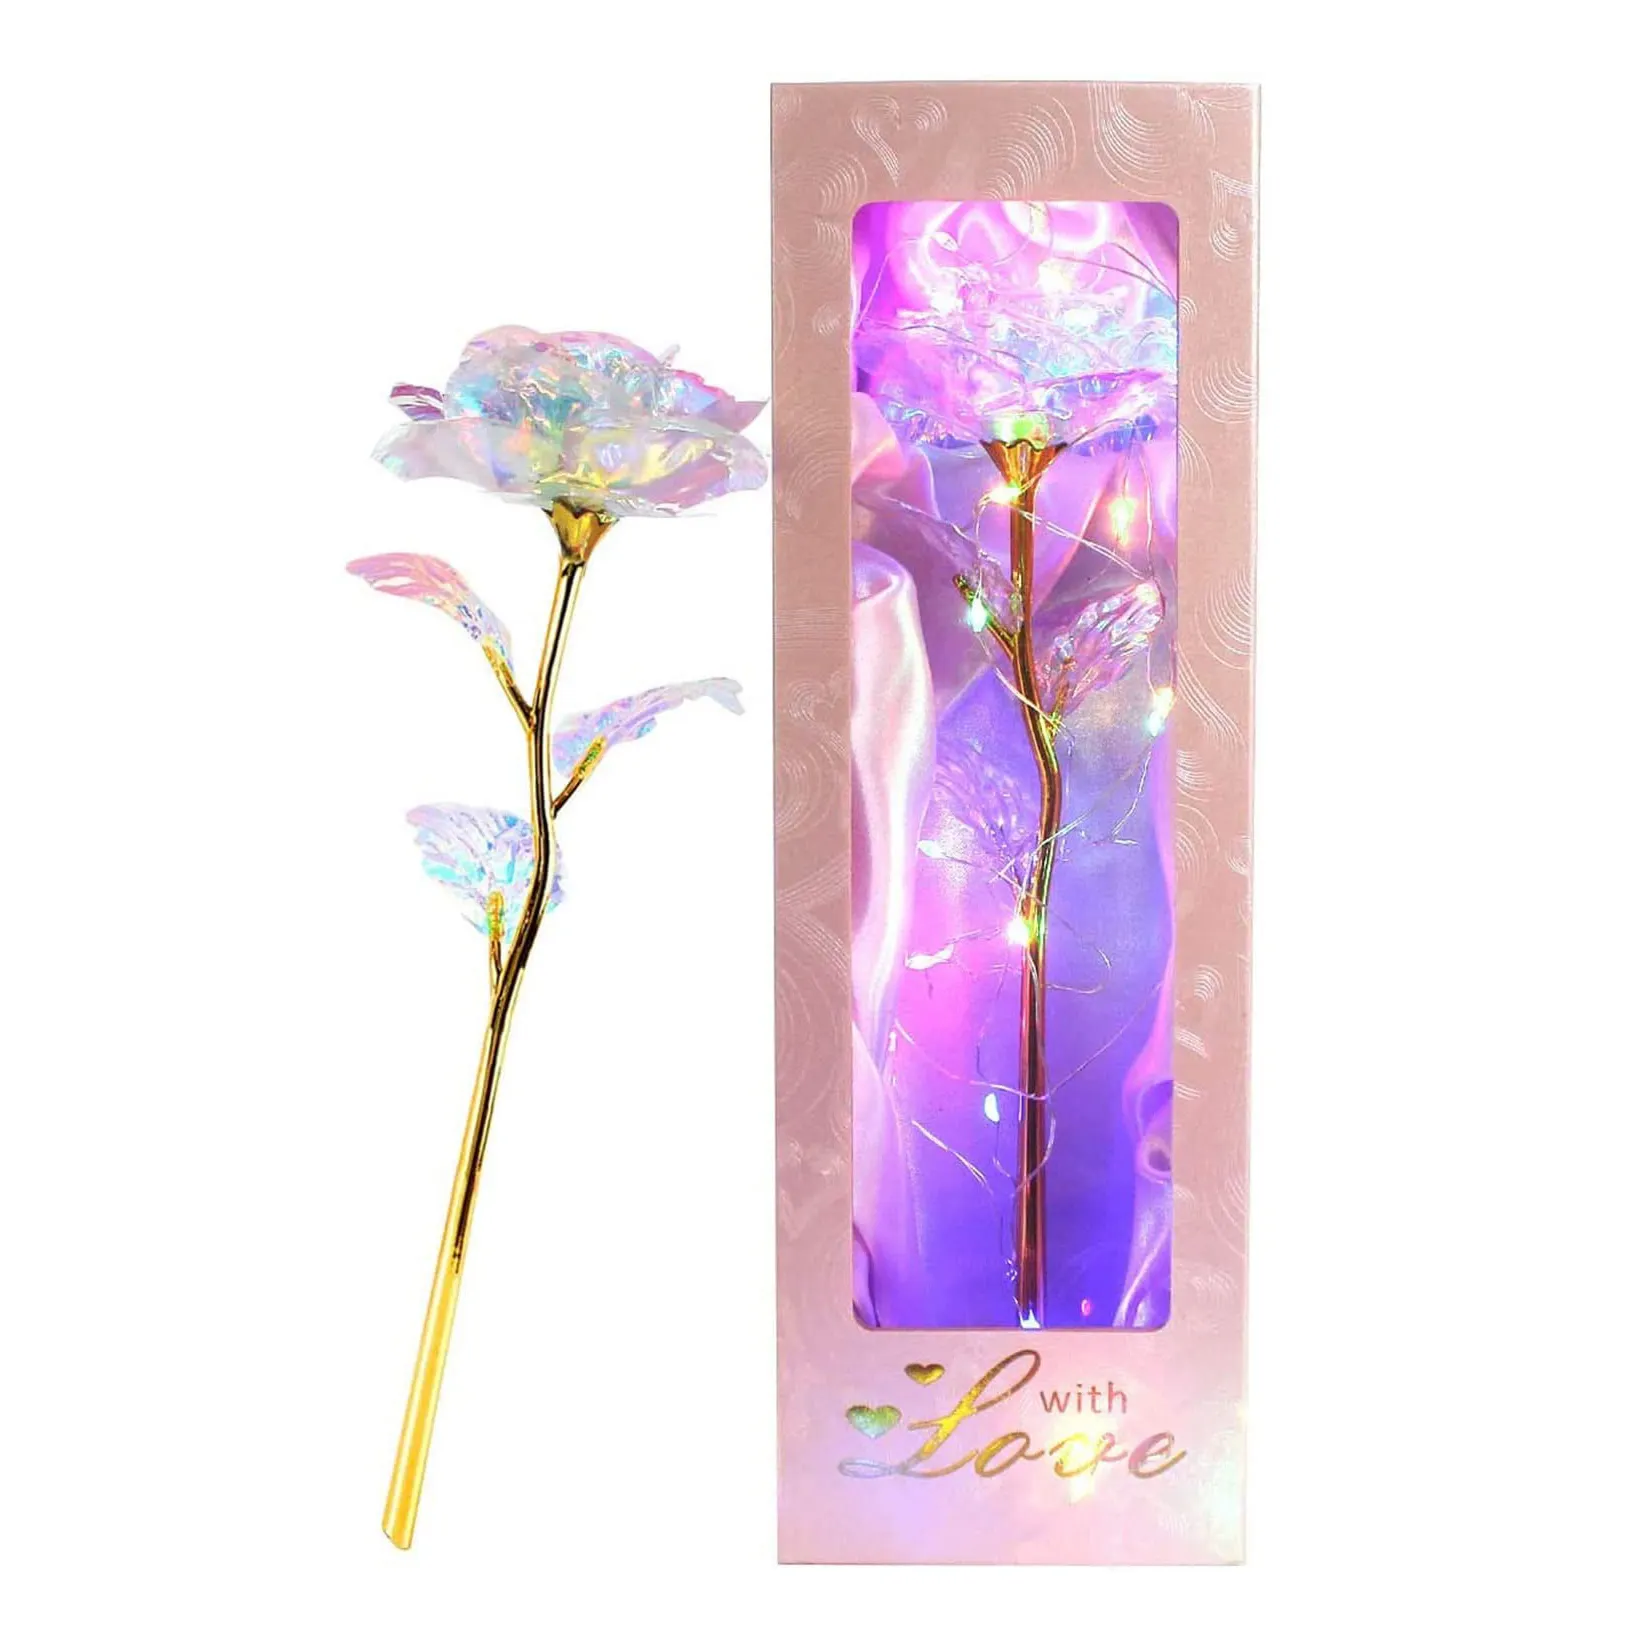 Colorful Galaxy Rose Gifts Gold Gifts Women 24K Golden Foil Roses LED Decor Mothers Day Valentines Day Birthday Anniversary